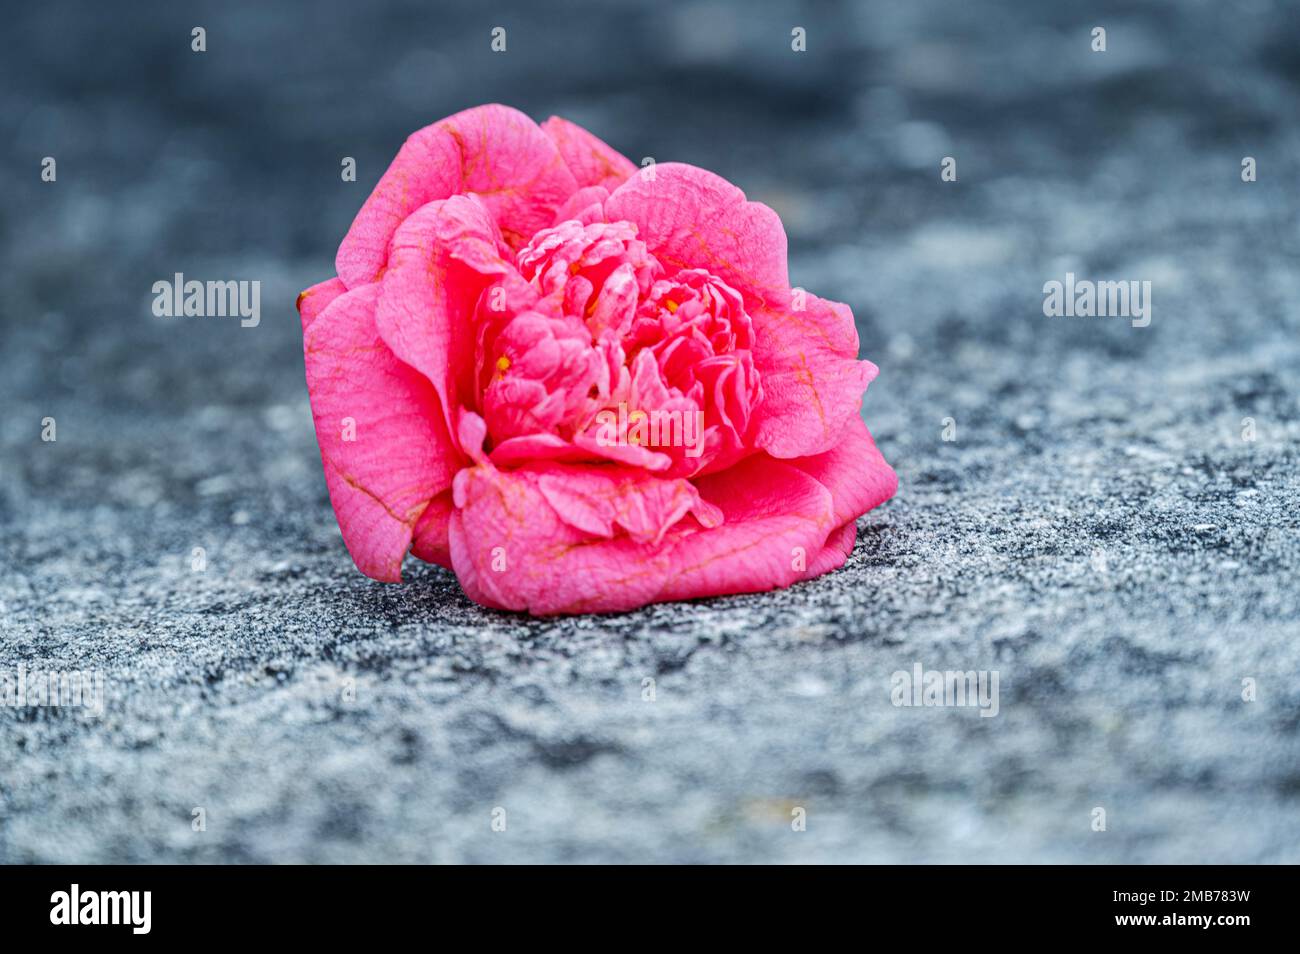 A pink flower resting on a gray concrete Stock Photo